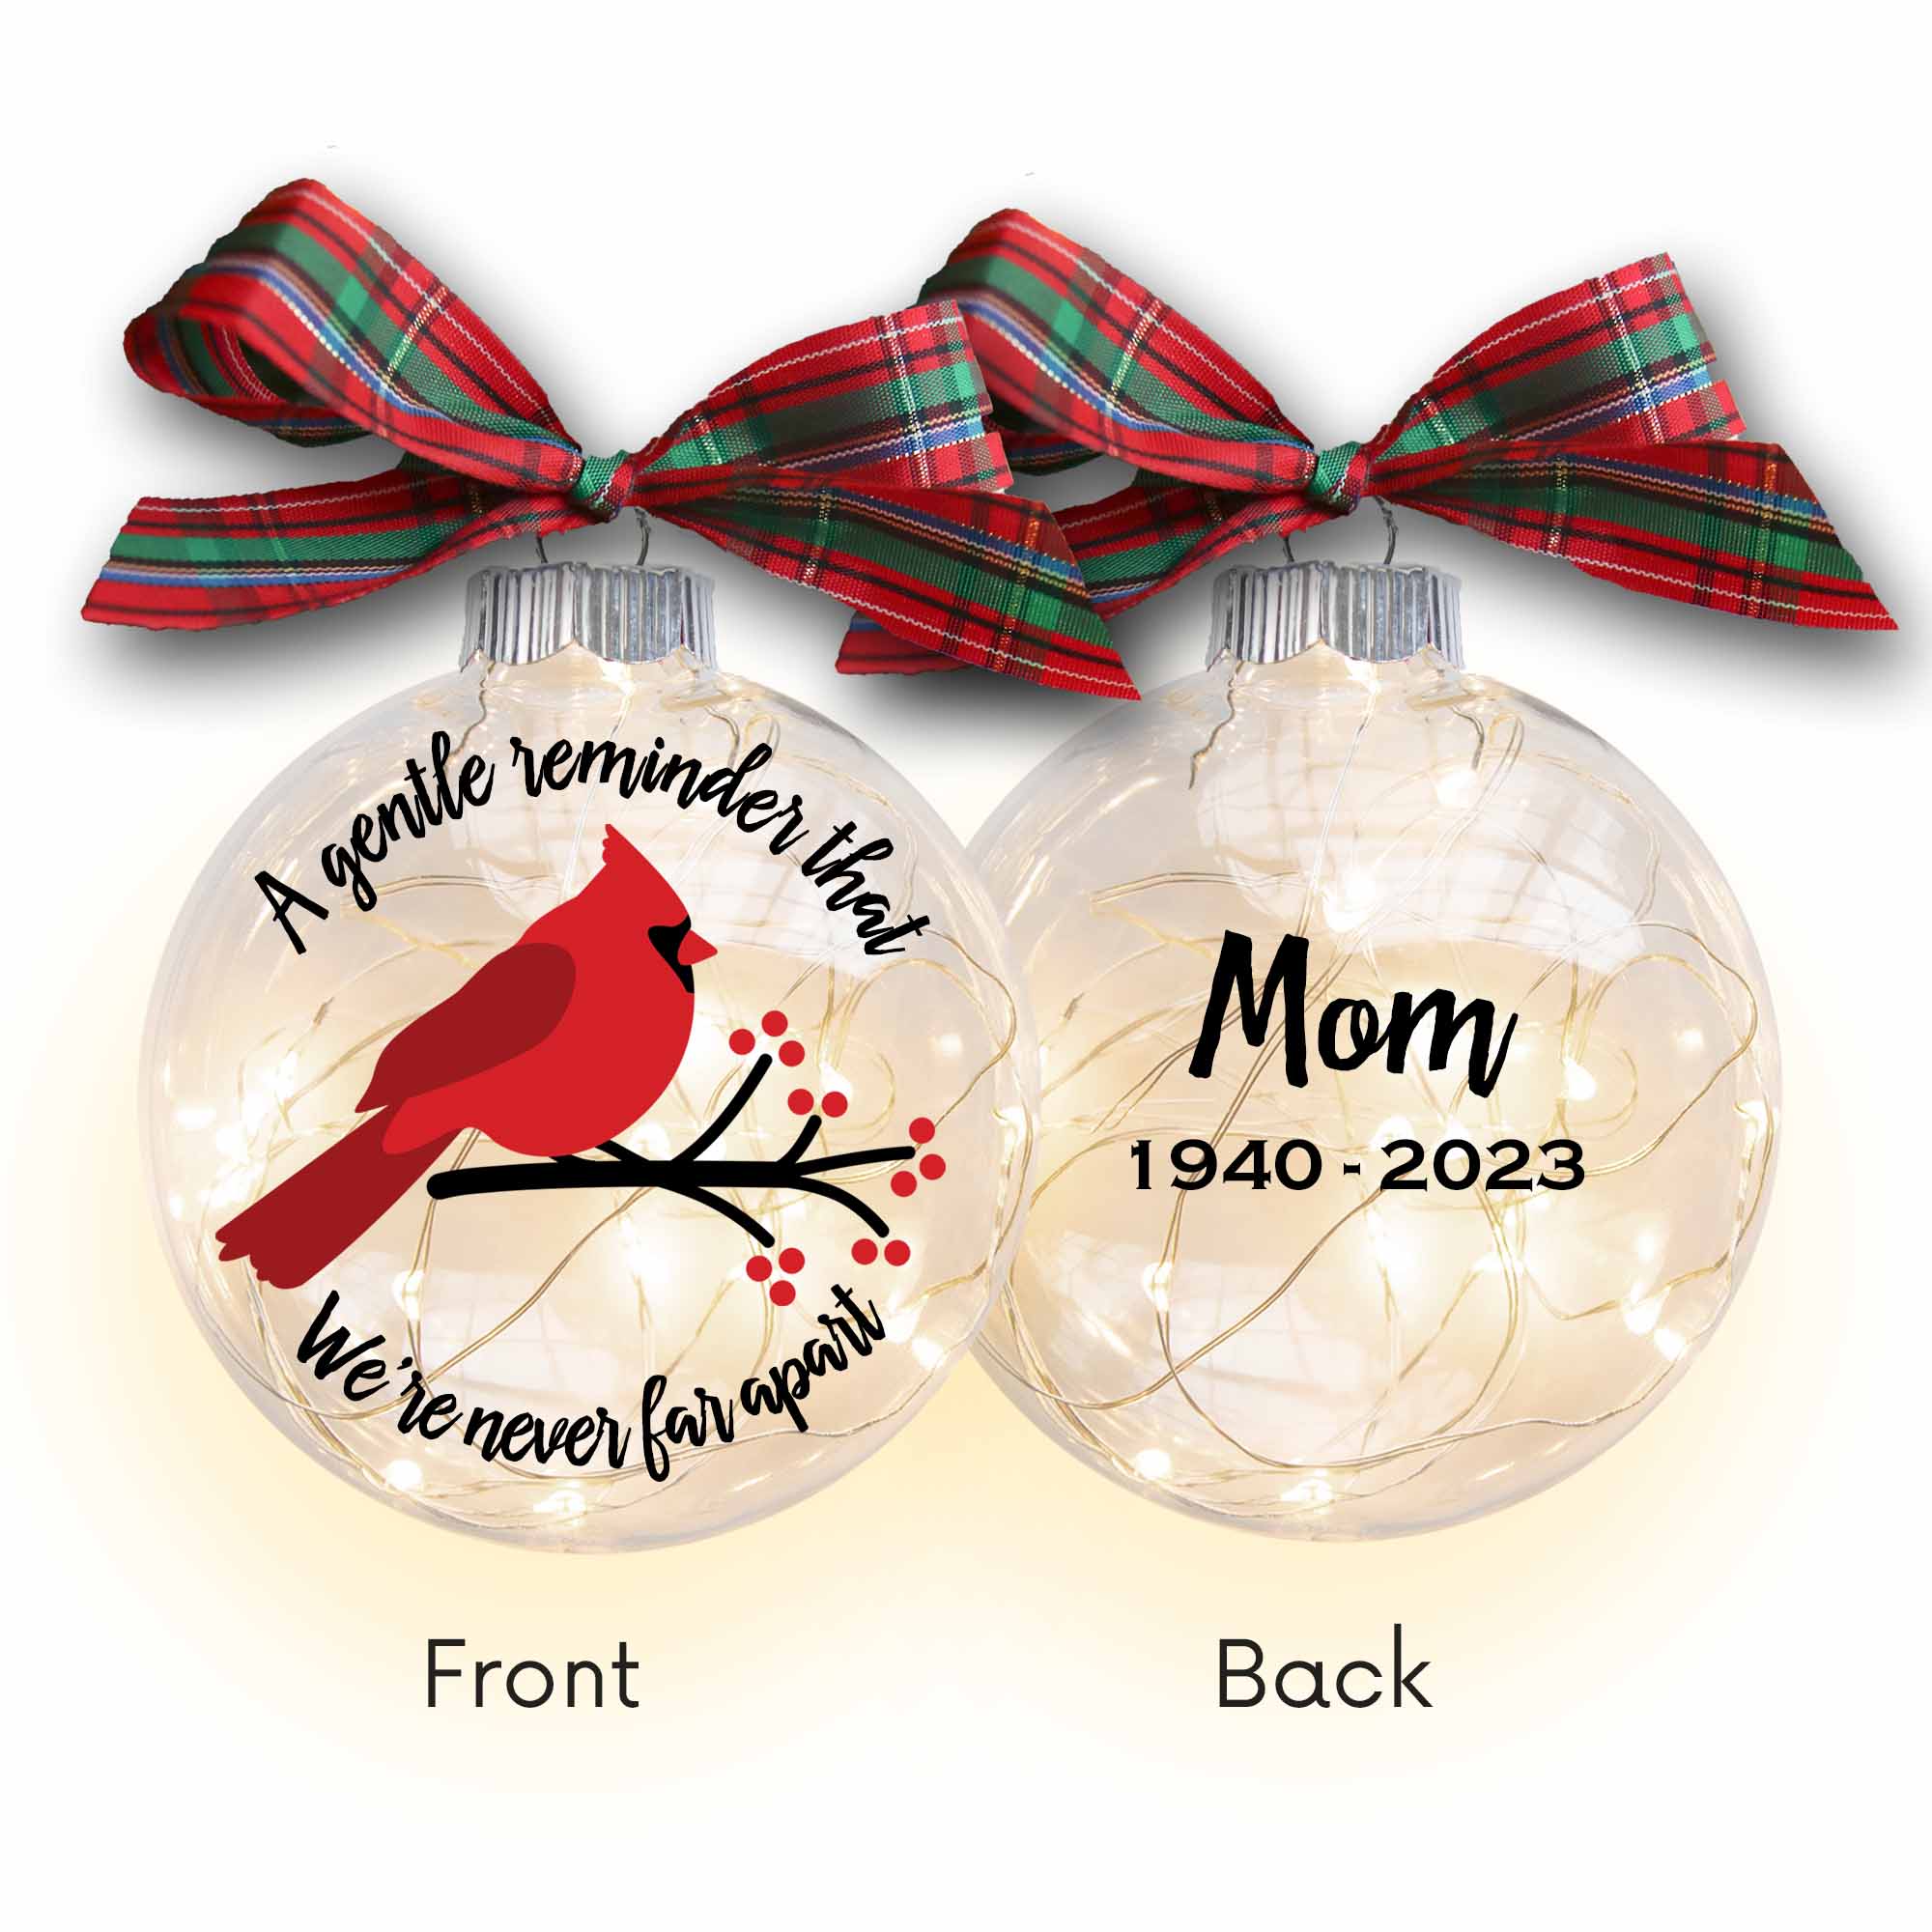 Sympathy Lighted Cardinal Christmas Ornament, Personalized Memorial Gift